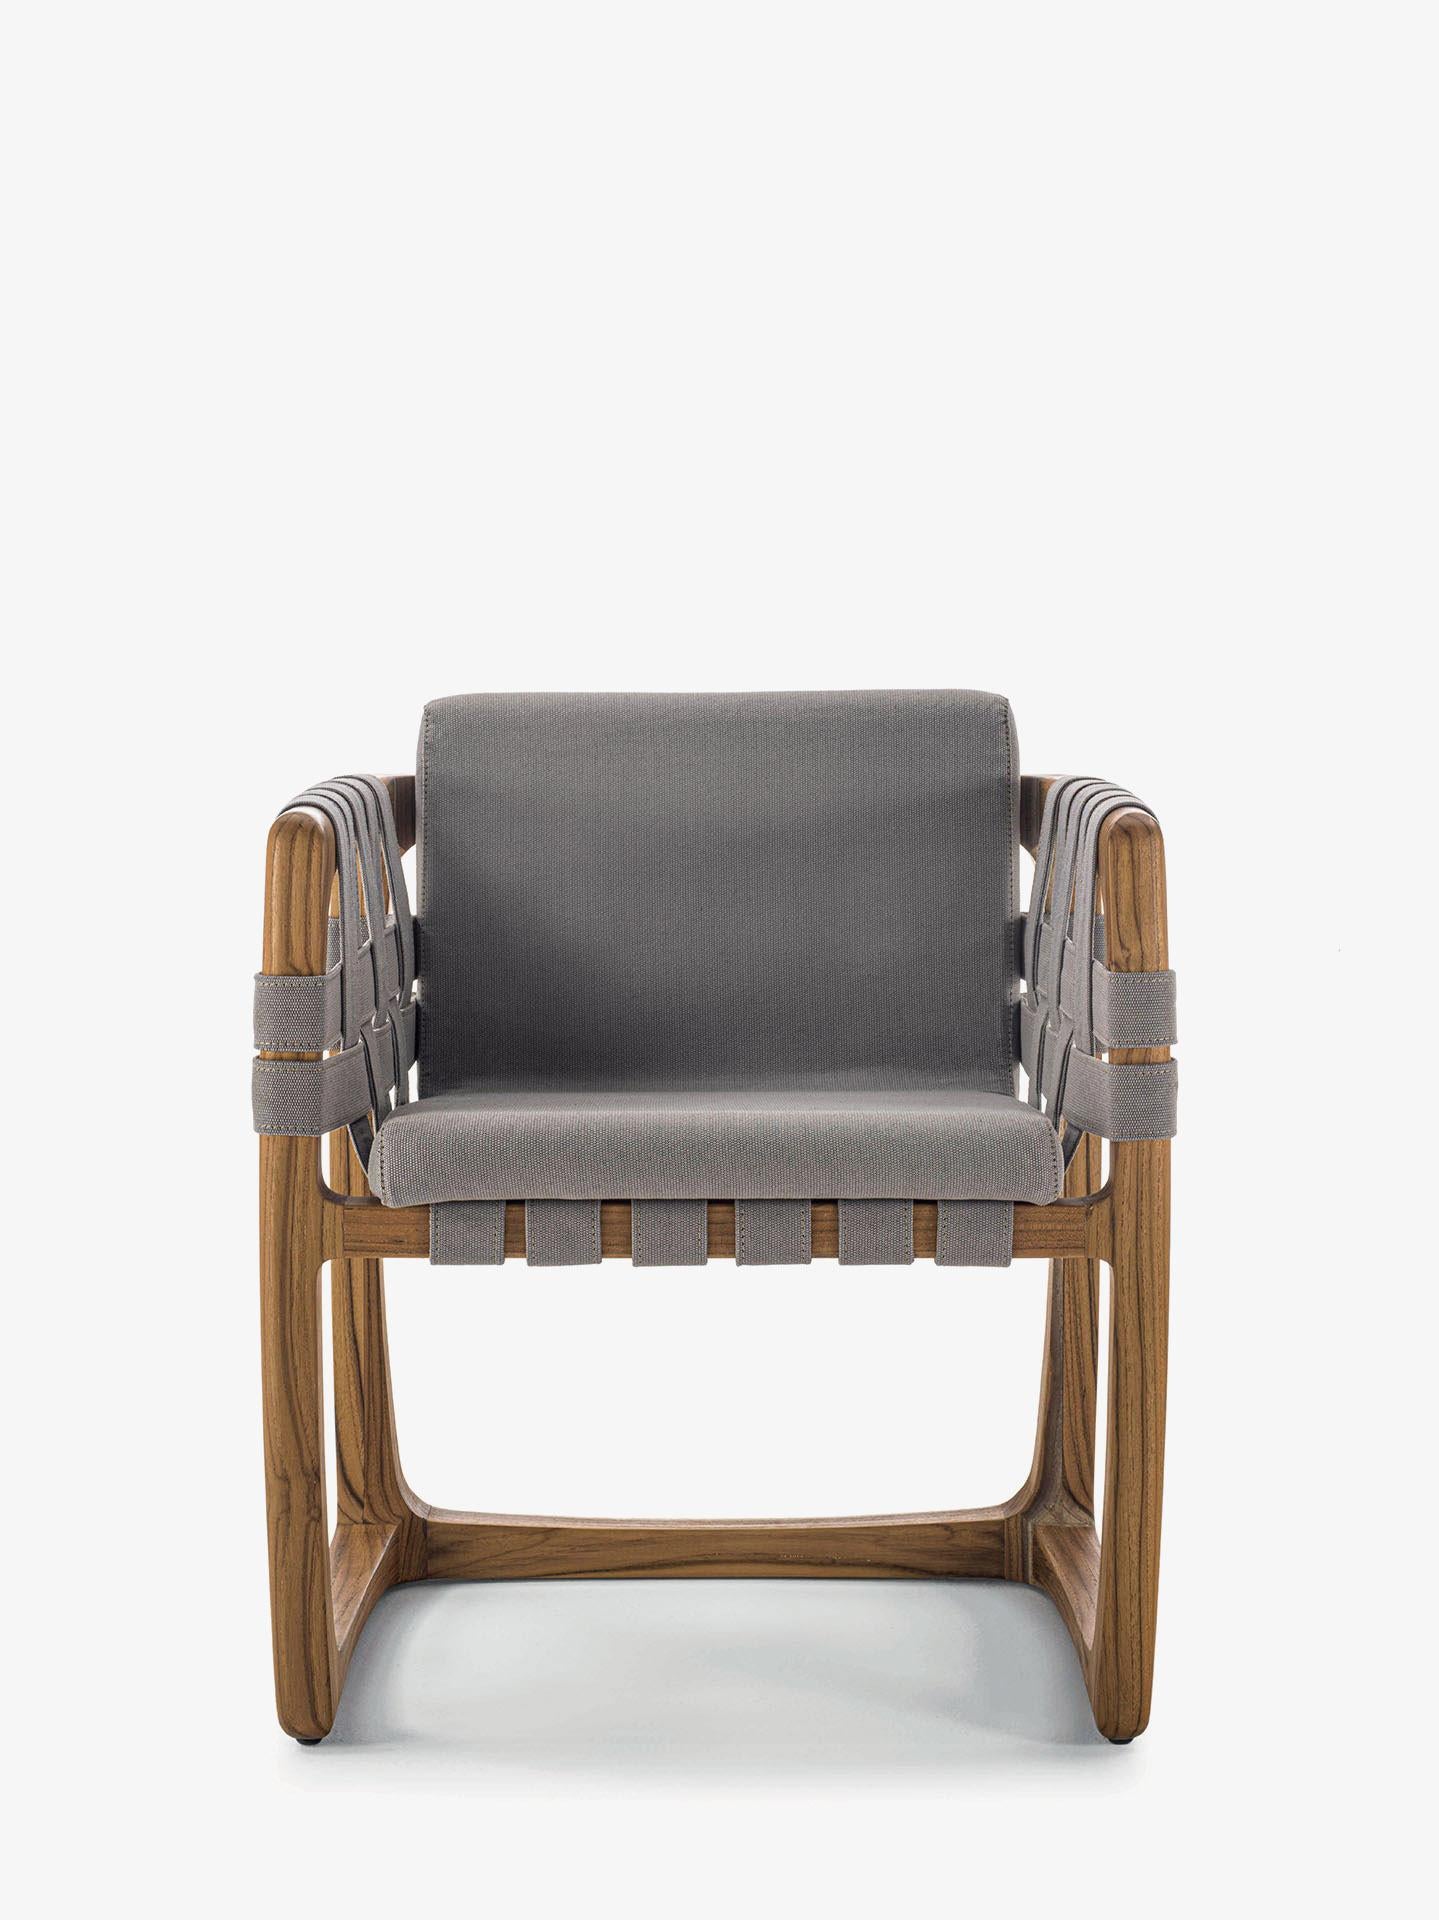 Padded chair with structure in solid teak wood turned, assembled and sanded completely by hand. An original detail are the strips of outdoor fabric running both under the seat, on the backrest and on the armrests.